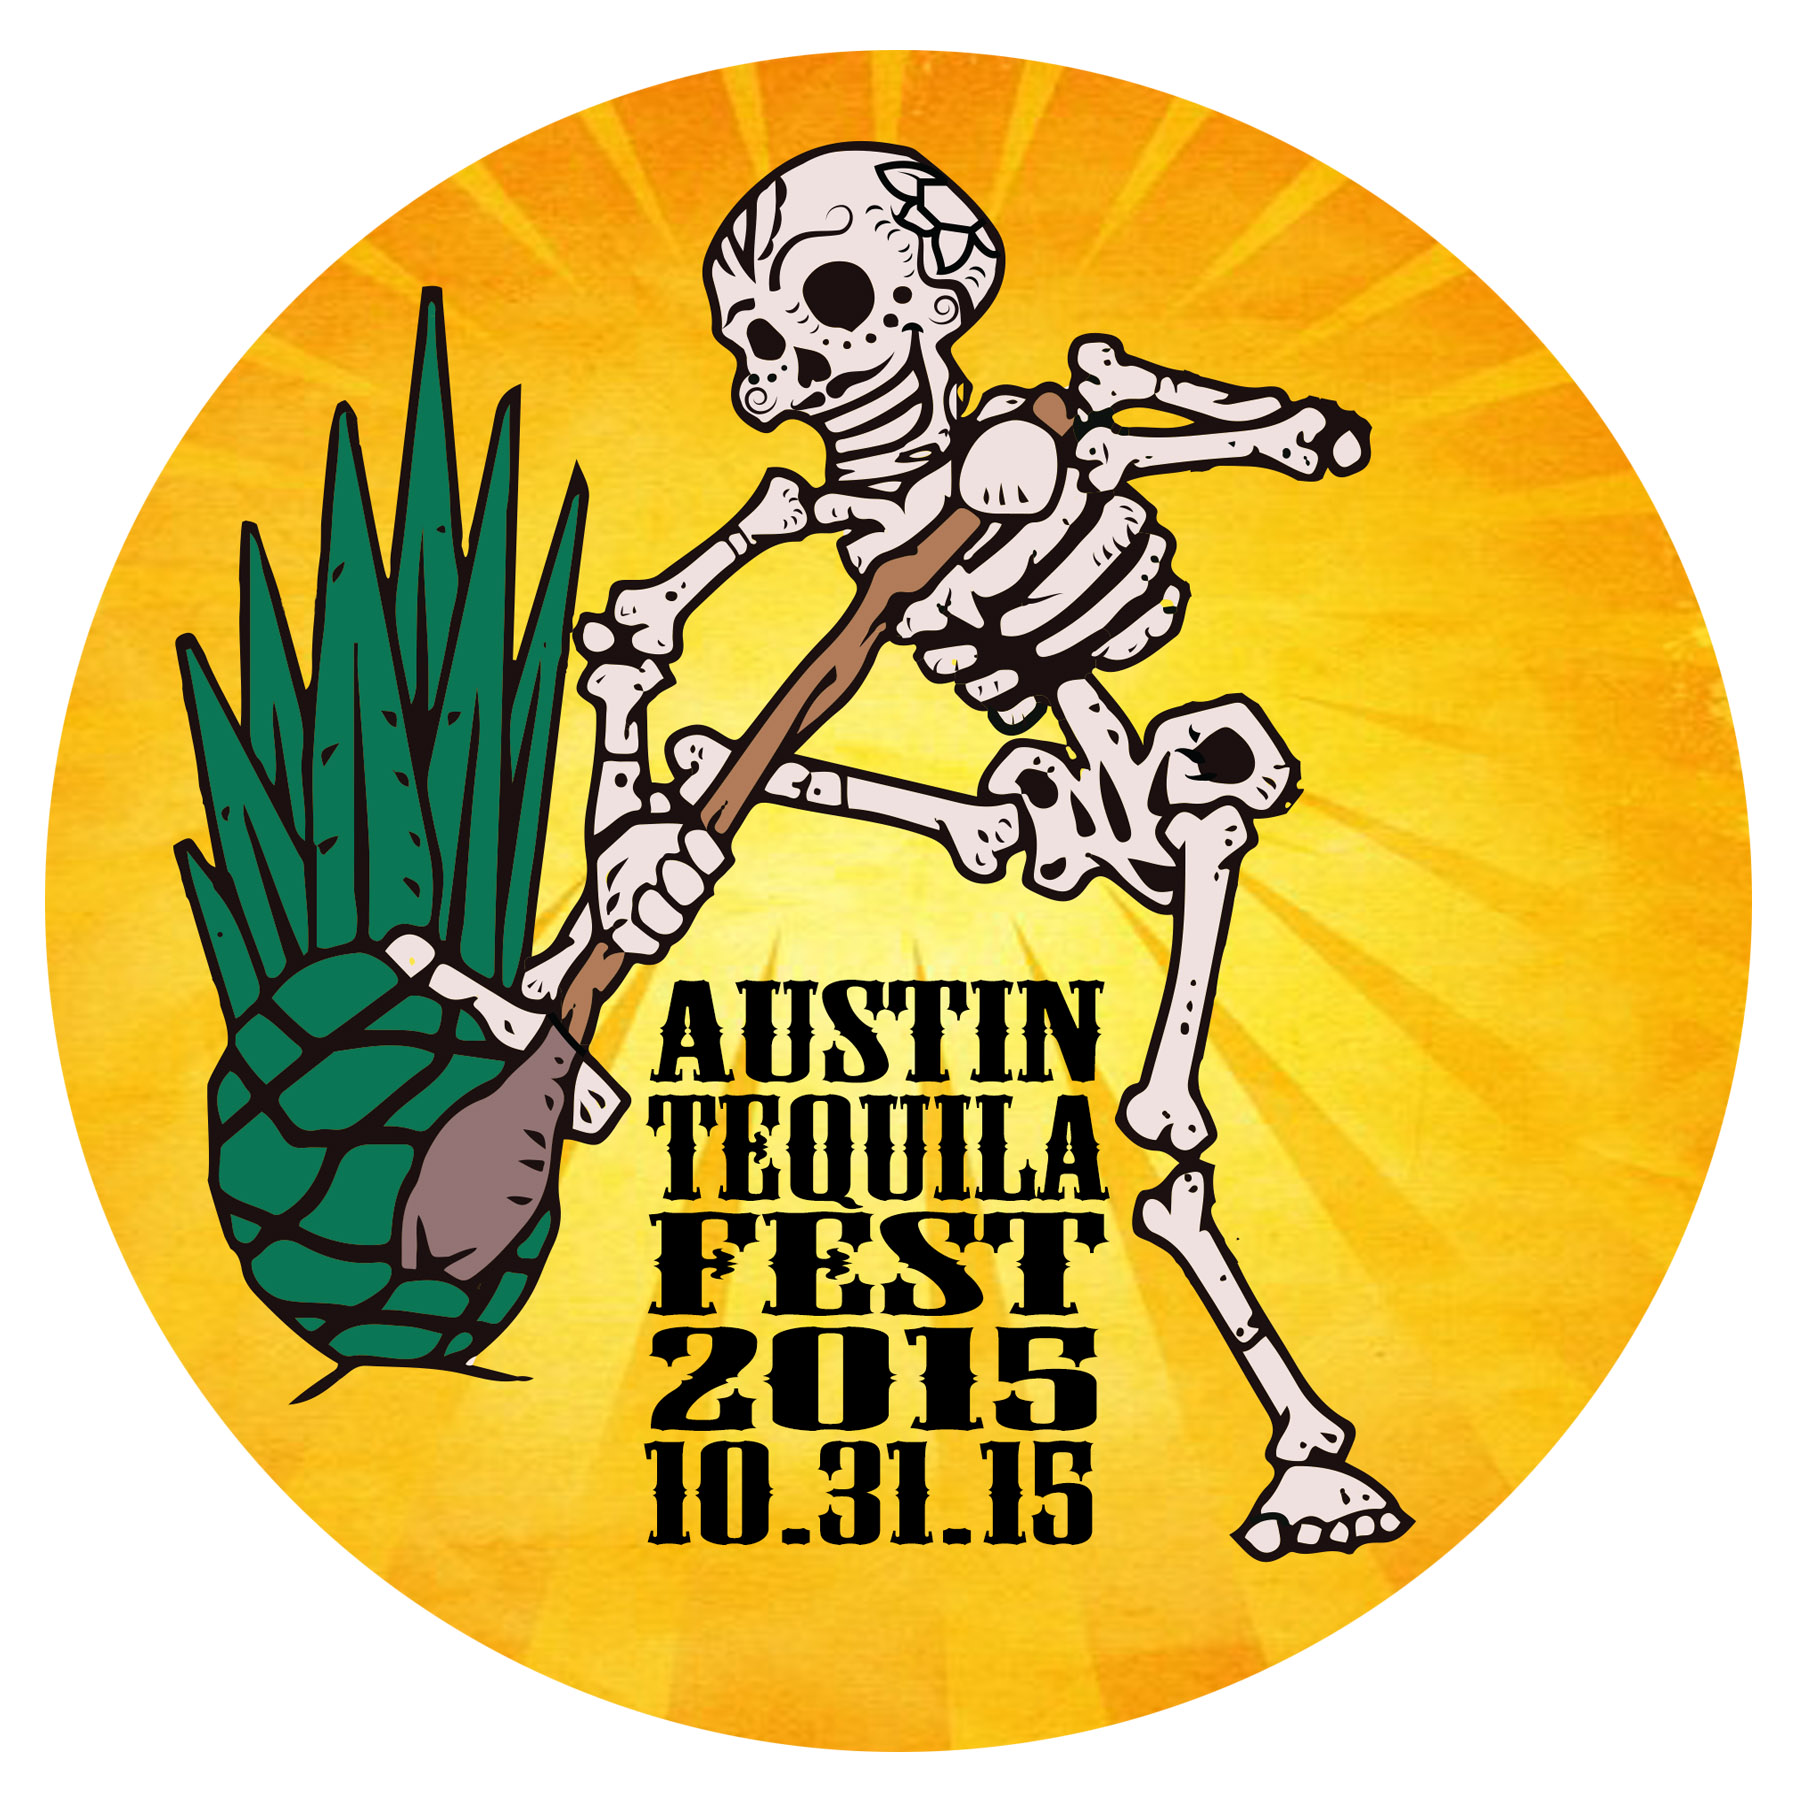 Austin Tequila Festival Contests Events & Promotions The Austin